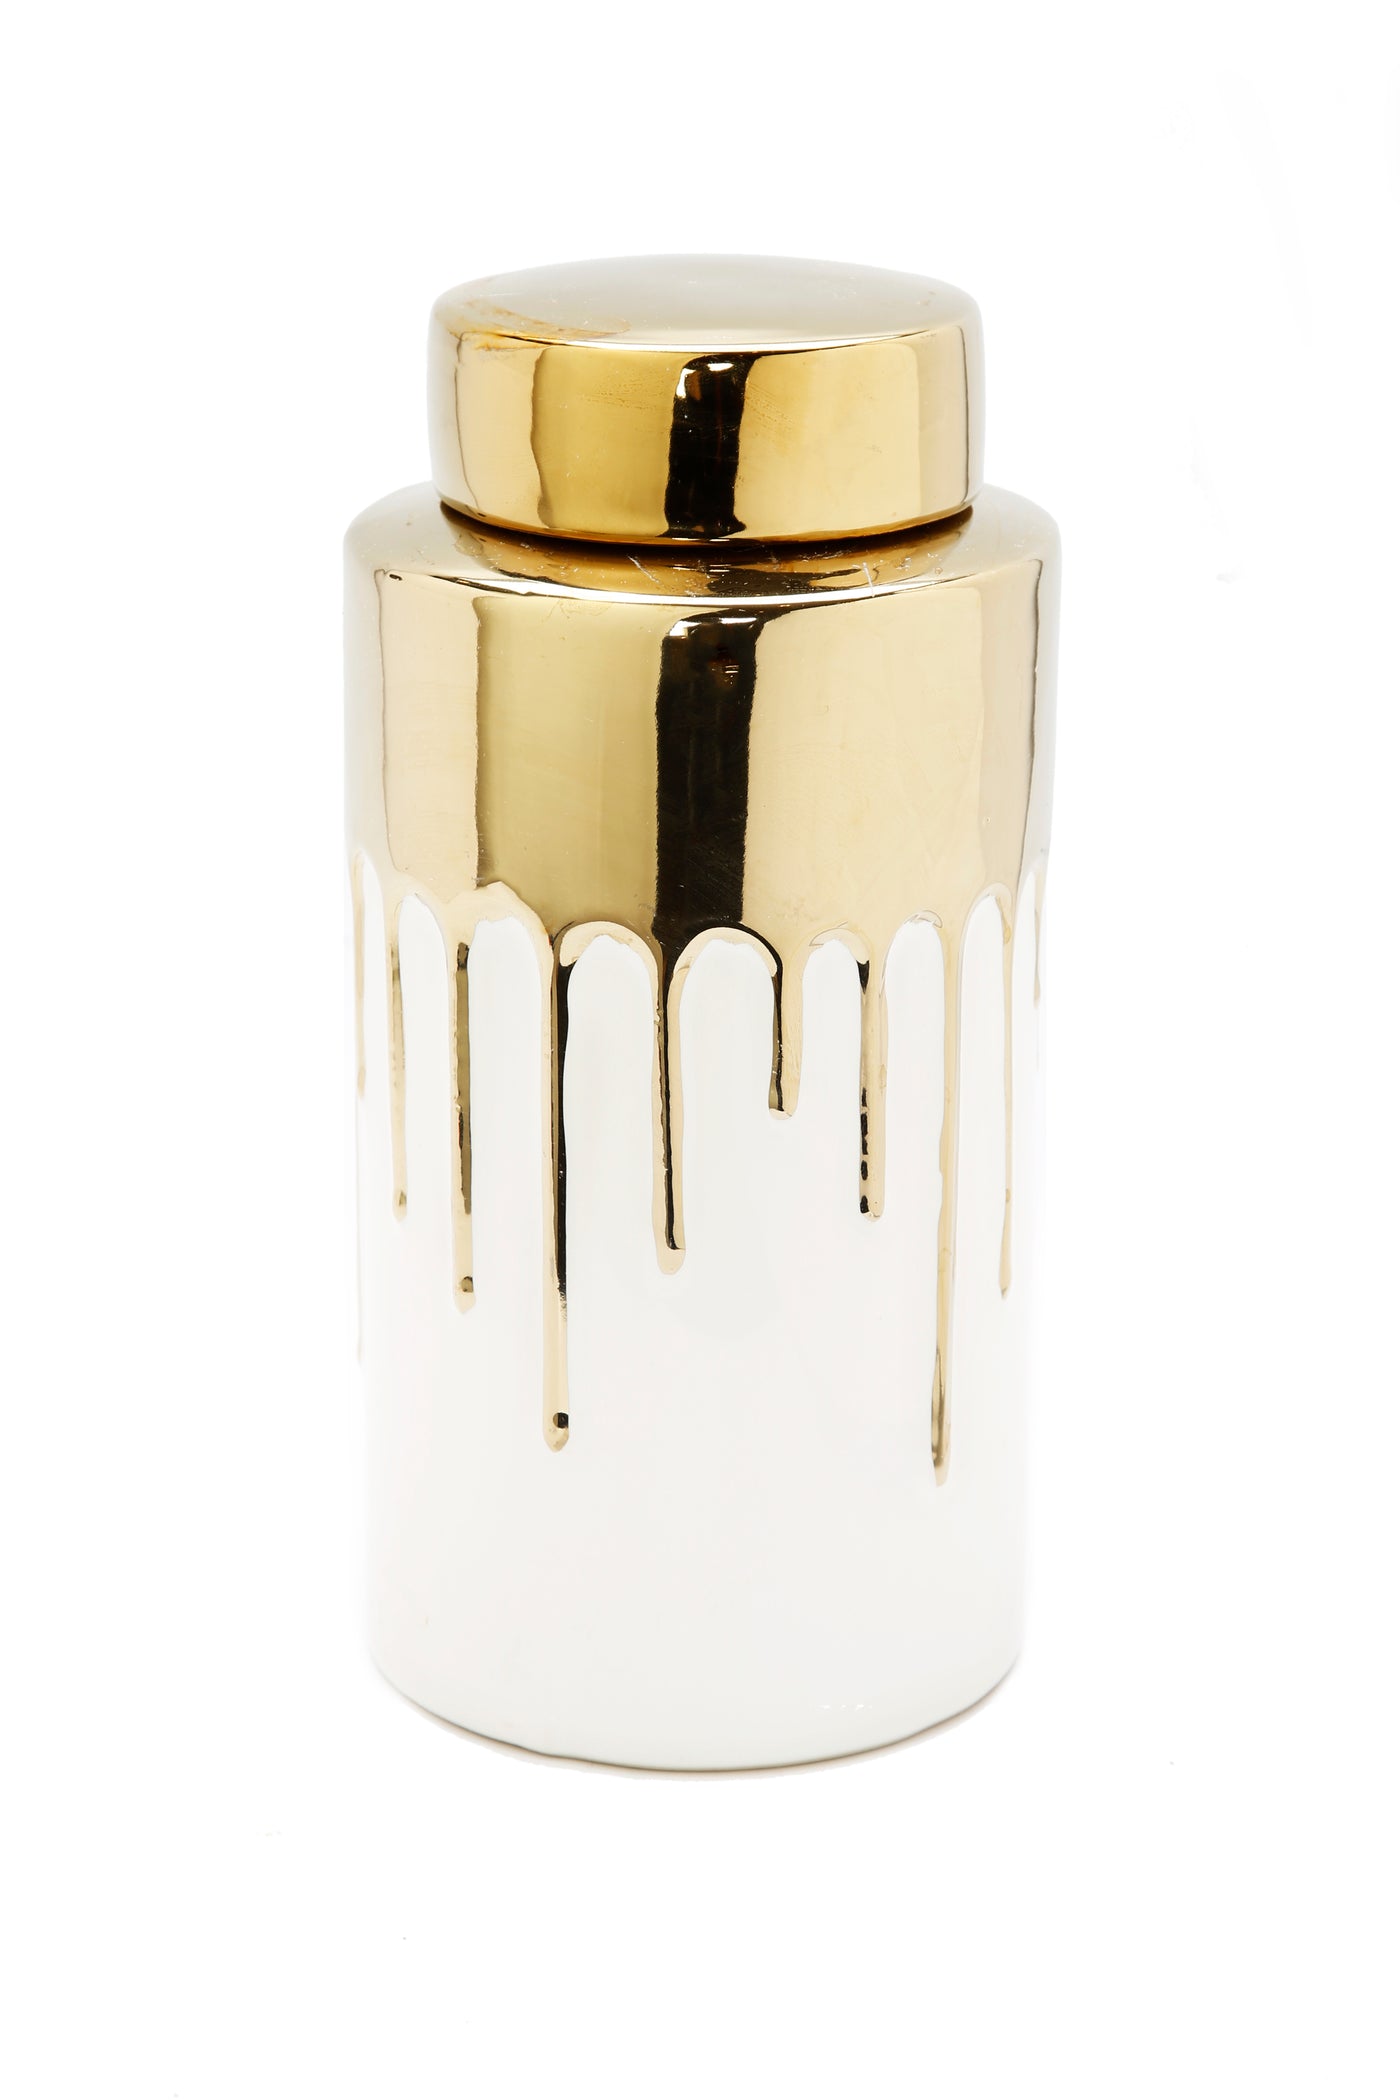 White Jar with Gold Cover and Drip Design